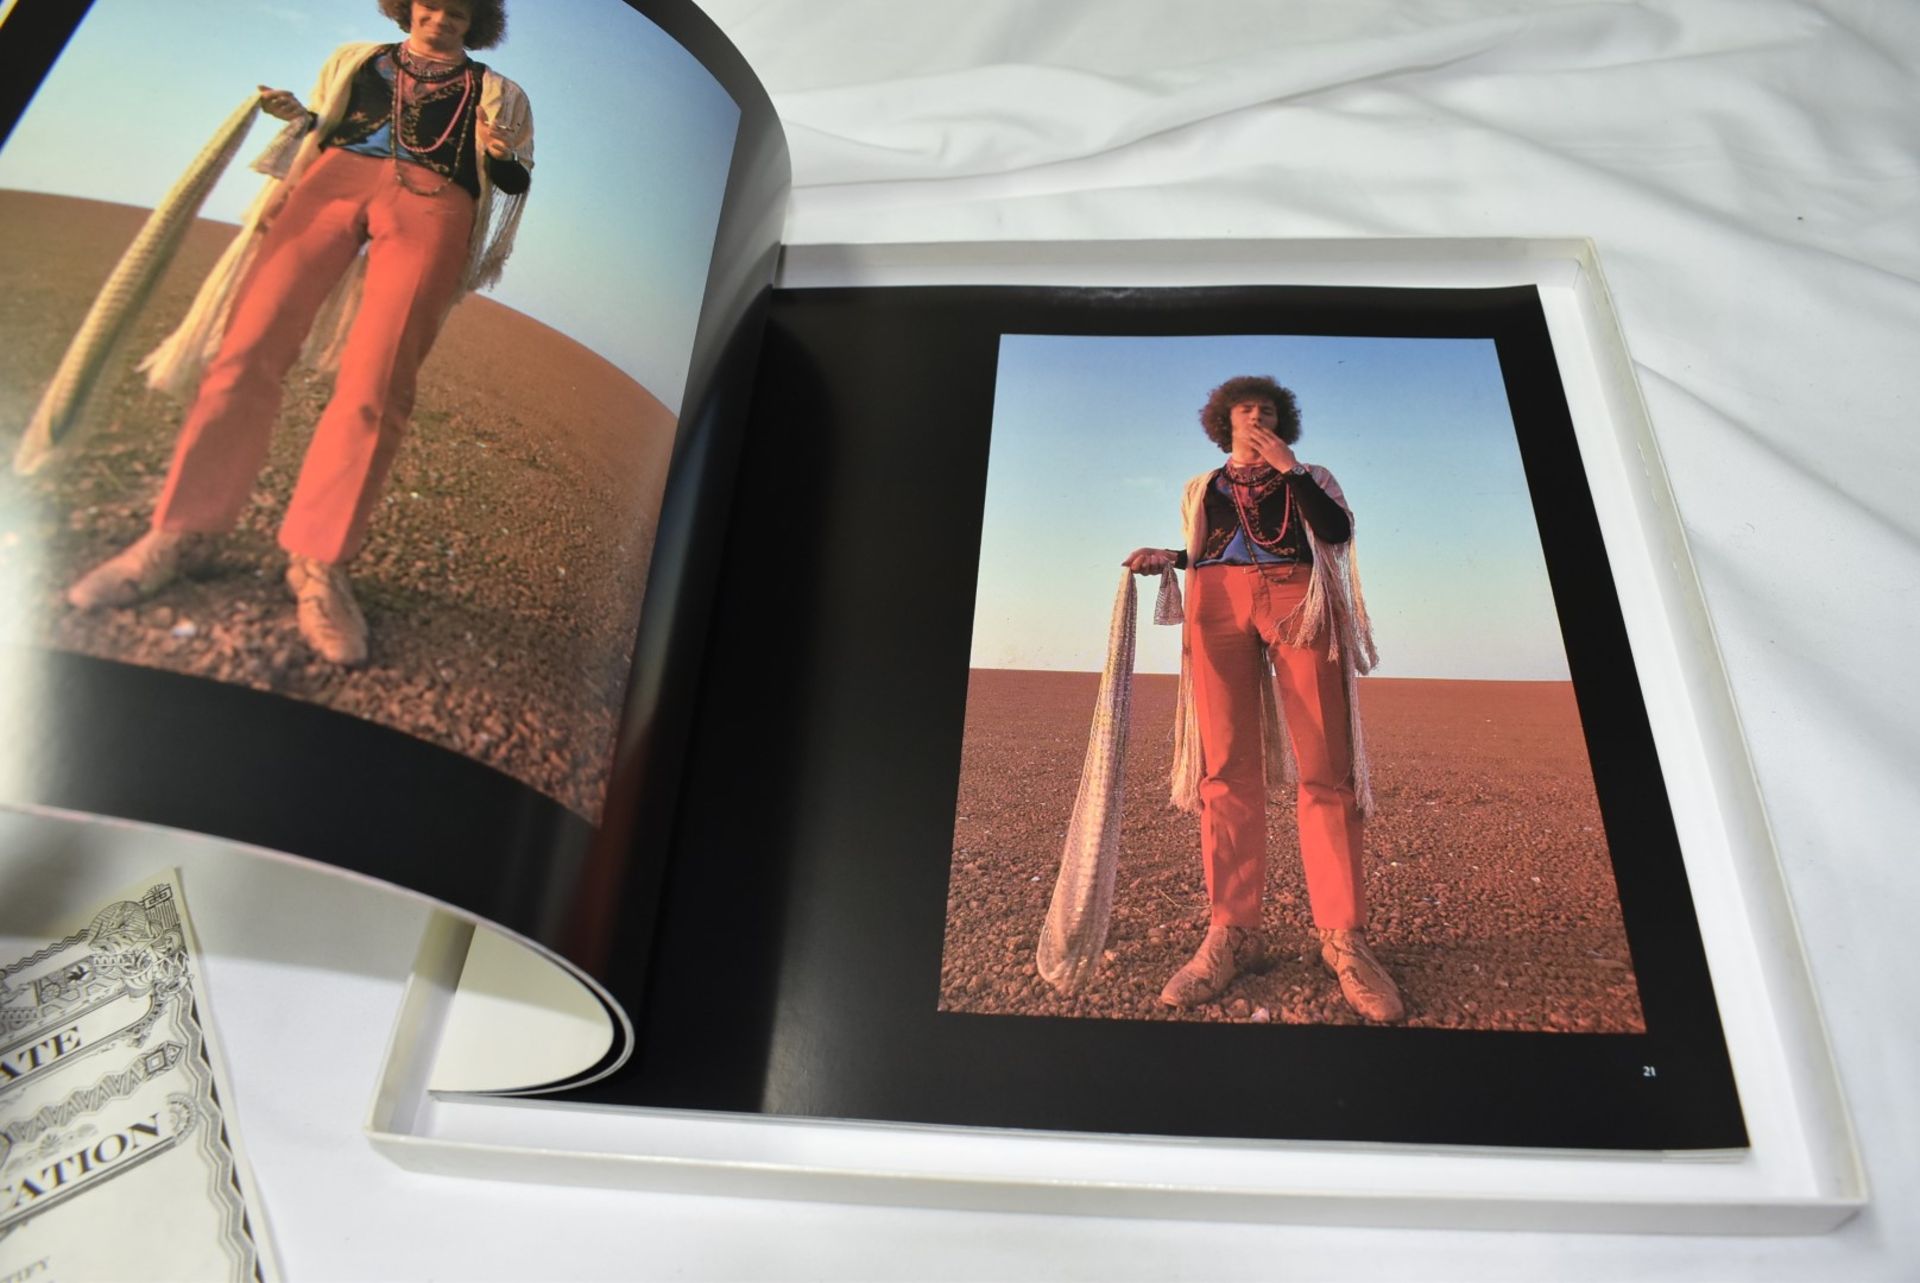 1 x Cream in Gear Limited Edition Box Set Featuring a 96 Page Book of Previously Unpublished - Image 10 of 14